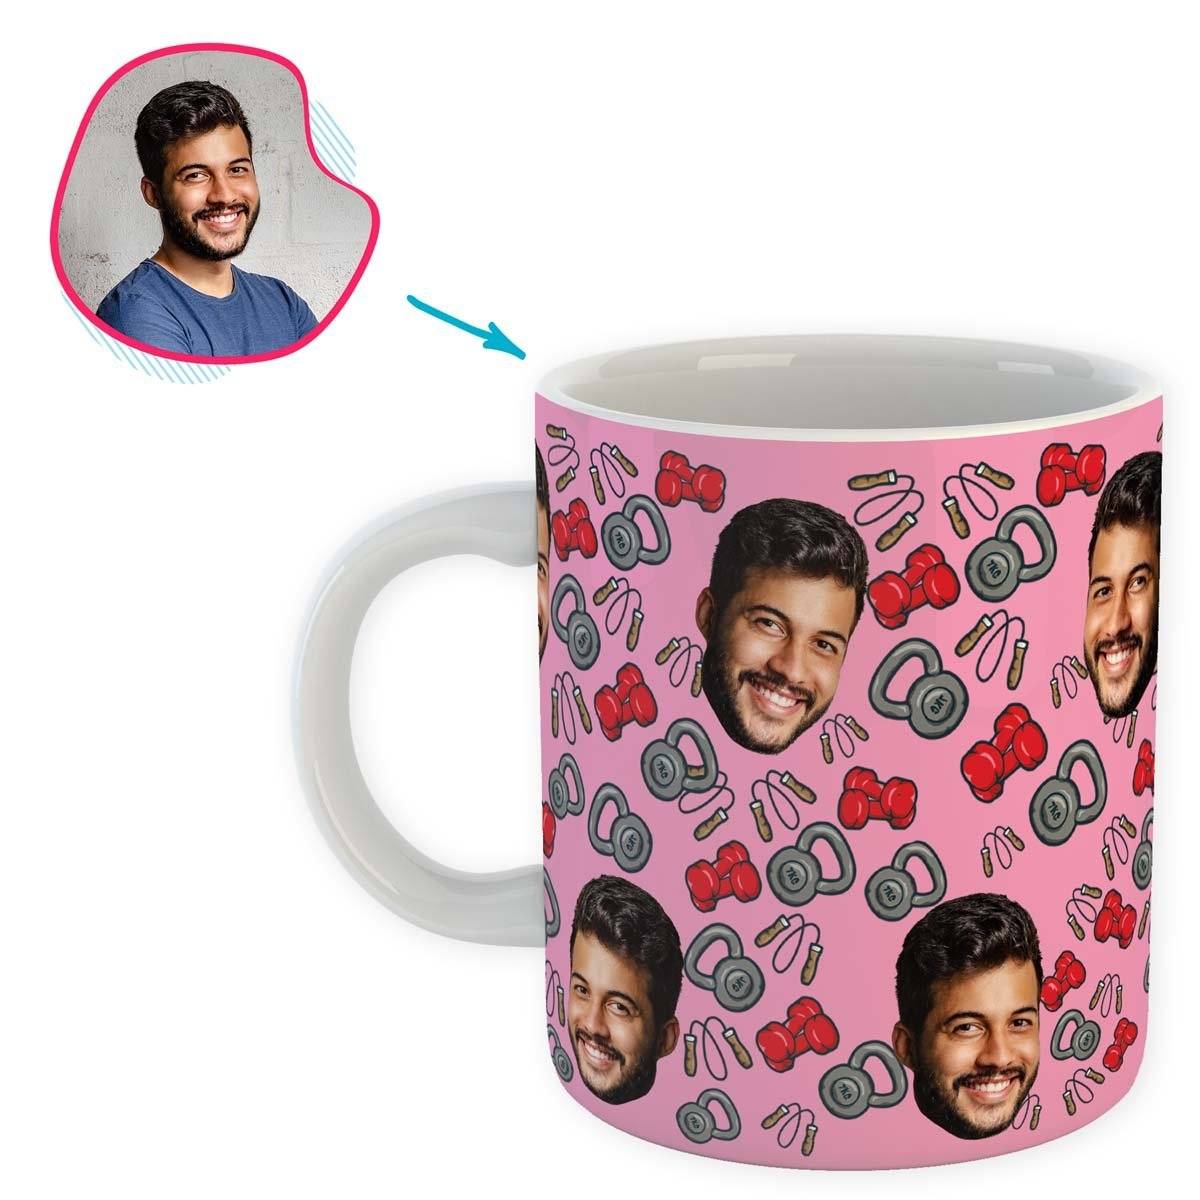 pink Gym & Fitness mug personalized with photo of face printed on it